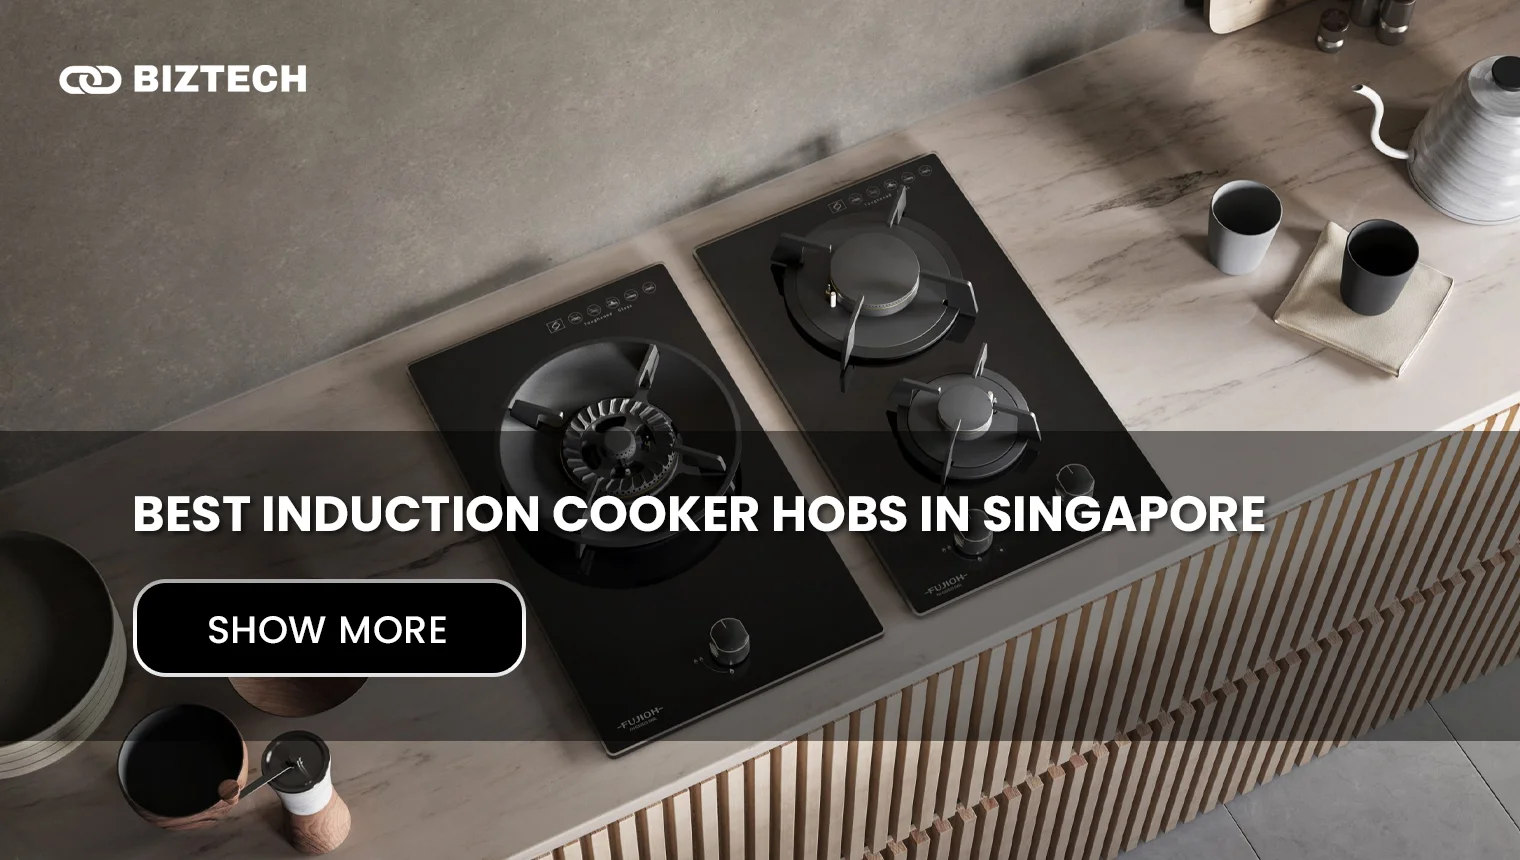 10 Best Induction Cooker Hobs in Singapore: Built-in Stove